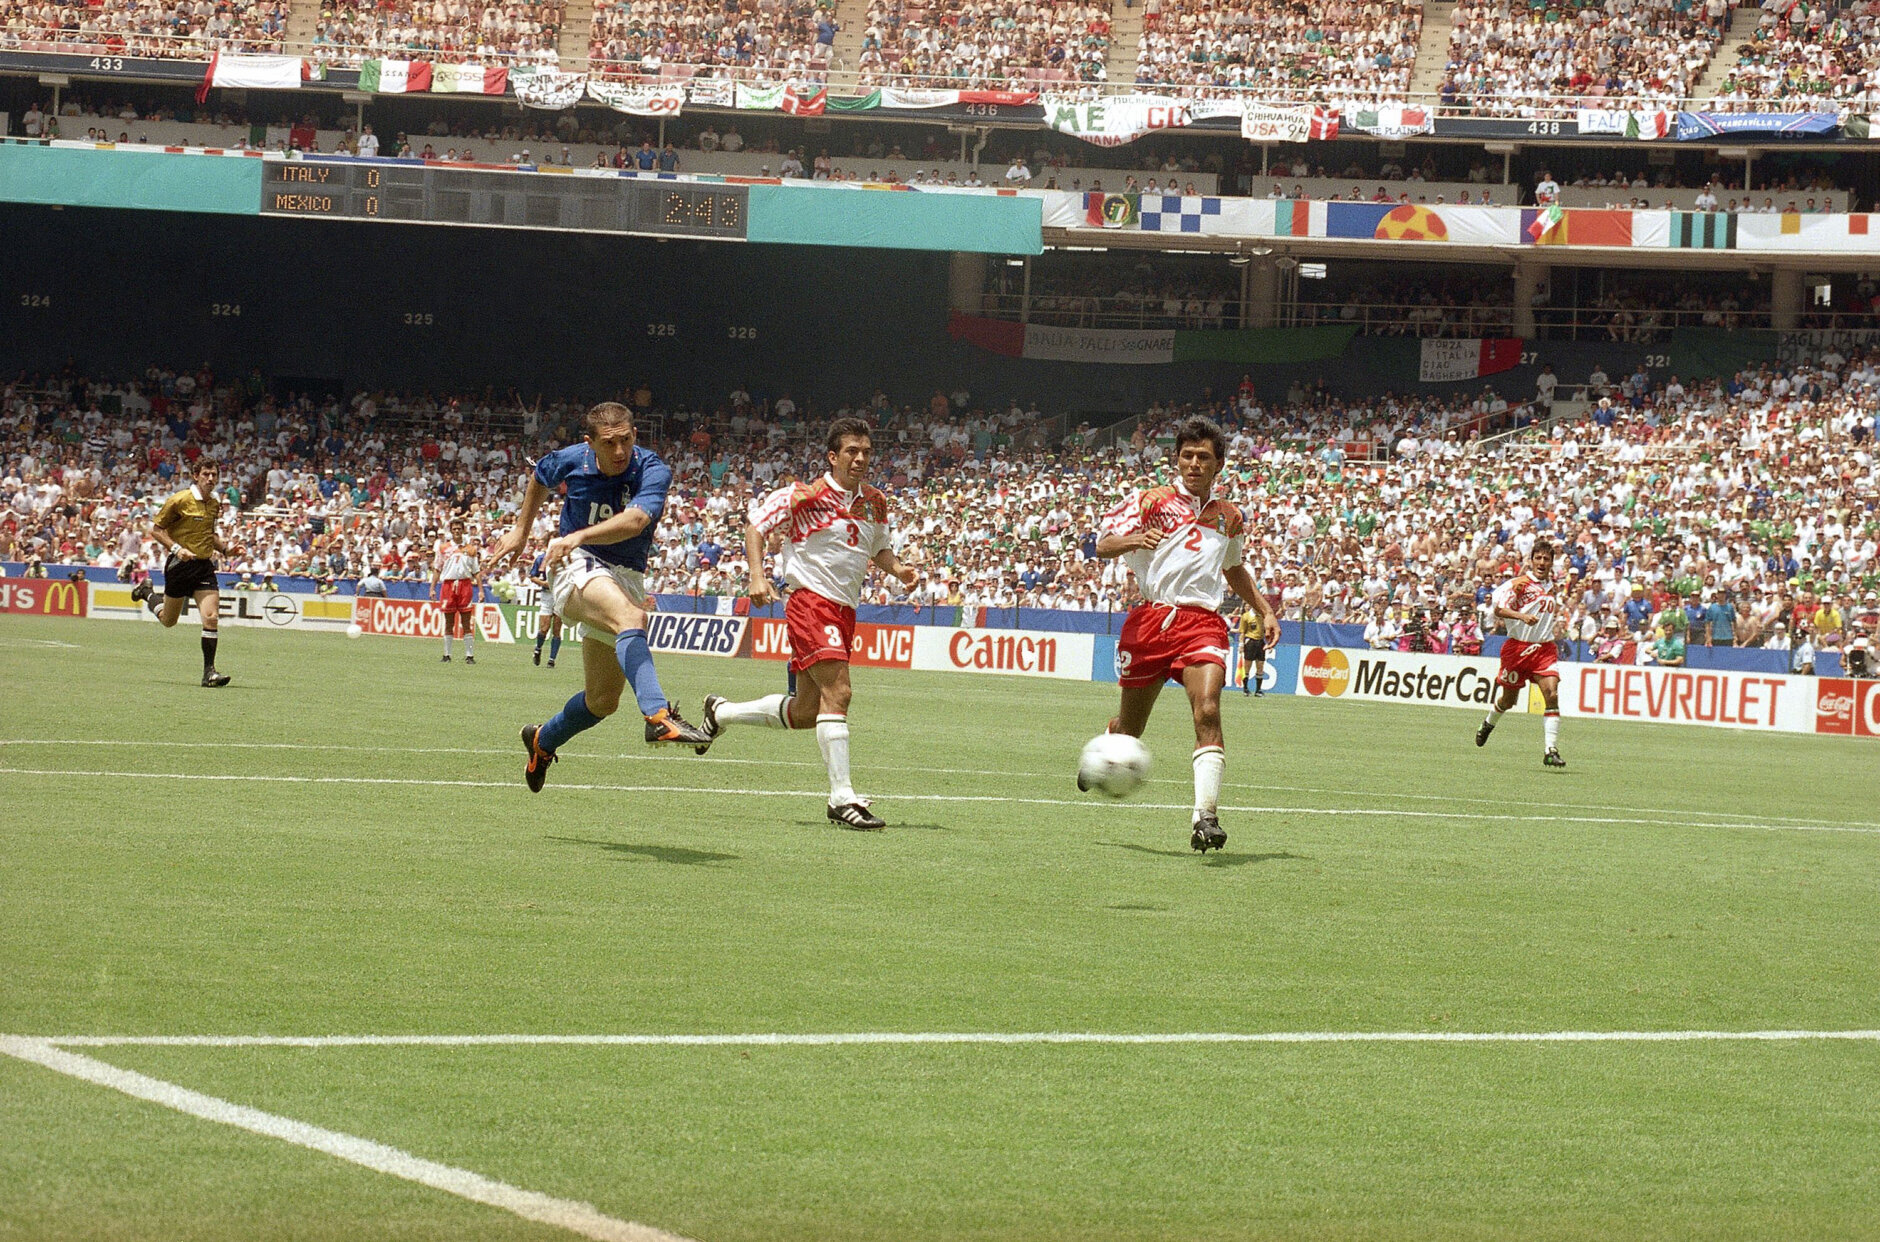 Italy?s Daniele Massaro (19) kicks a second half goal past Mexico?s Juan de Dios Ramirez (3) and Claudio Suarez (2) during the Italy Vs Mexico Group E World Cup match on Tuesday, June 28, 1994 at Washington?s RFK Stadium. Italy and Mexico tied 1-1 and Mexico is advancing to the next round. Italy only placed third in Group E, making the team?s fate yet uncertain. (AP Photo/Luca Bruno)